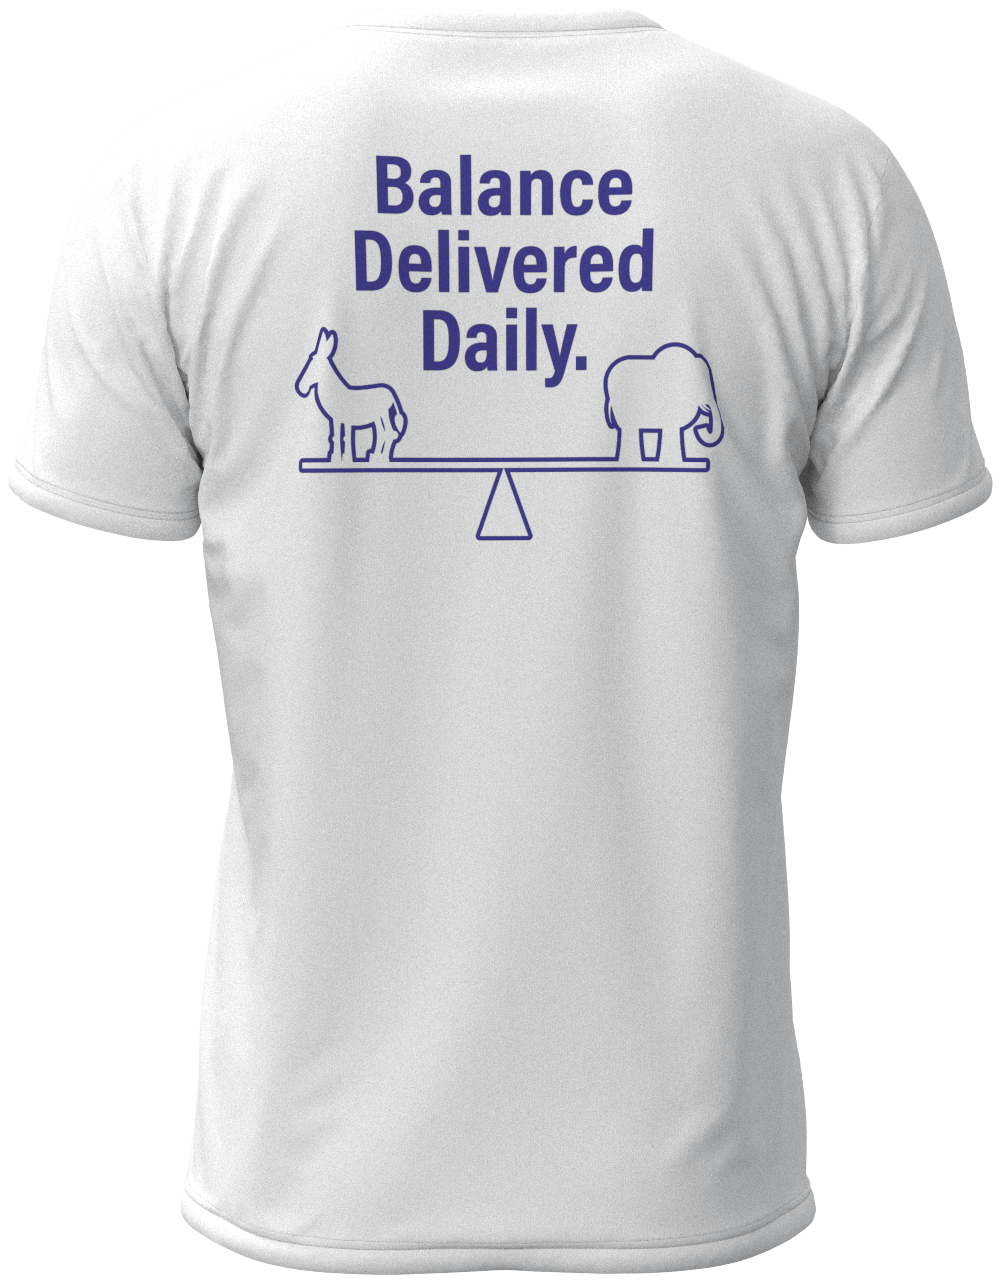 BALANCE DELIVERED DAILY